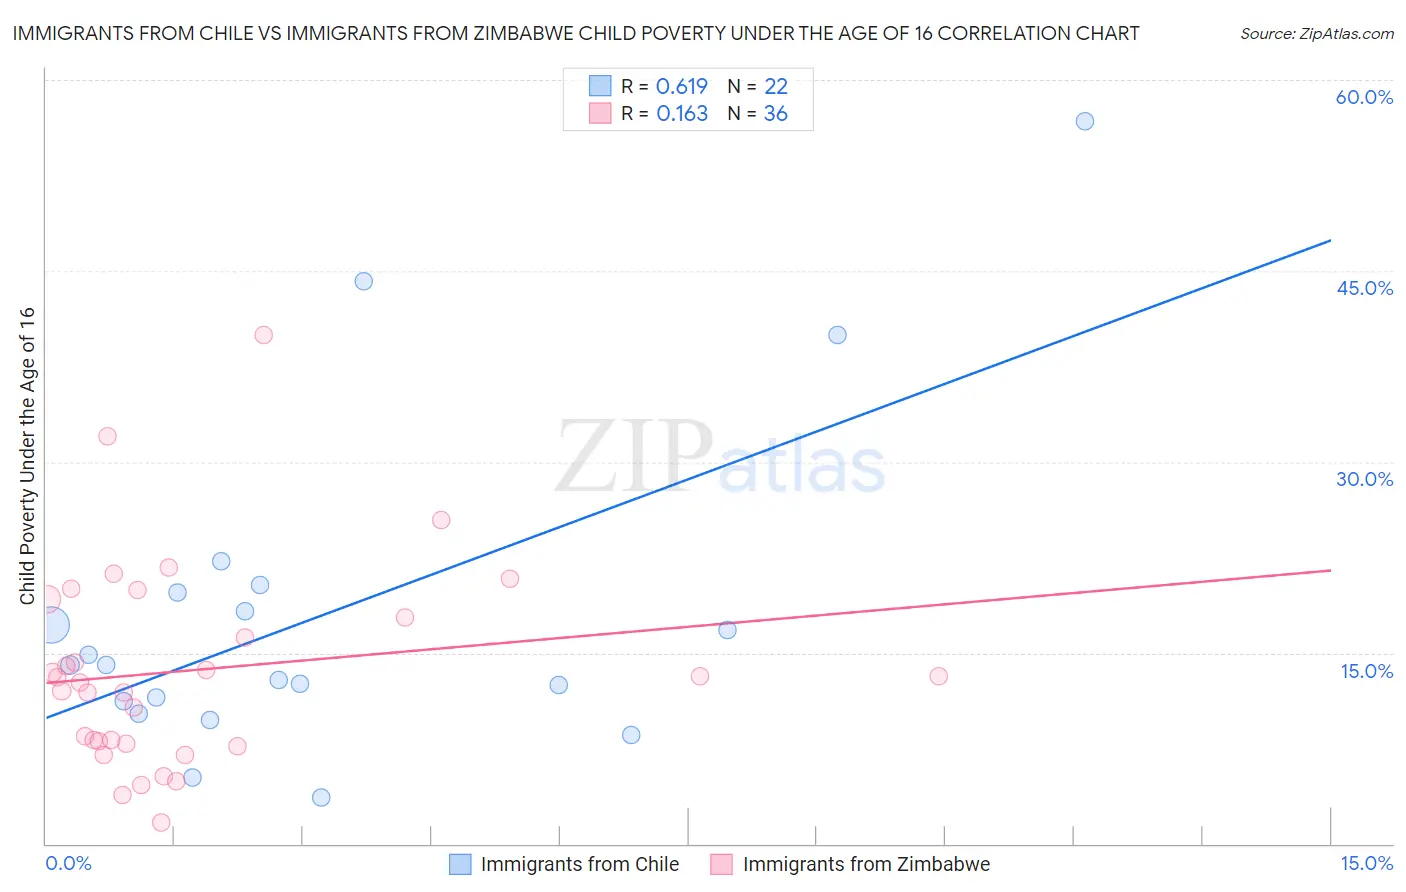 Immigrants from Chile vs Immigrants from Zimbabwe Child Poverty Under the Age of 16